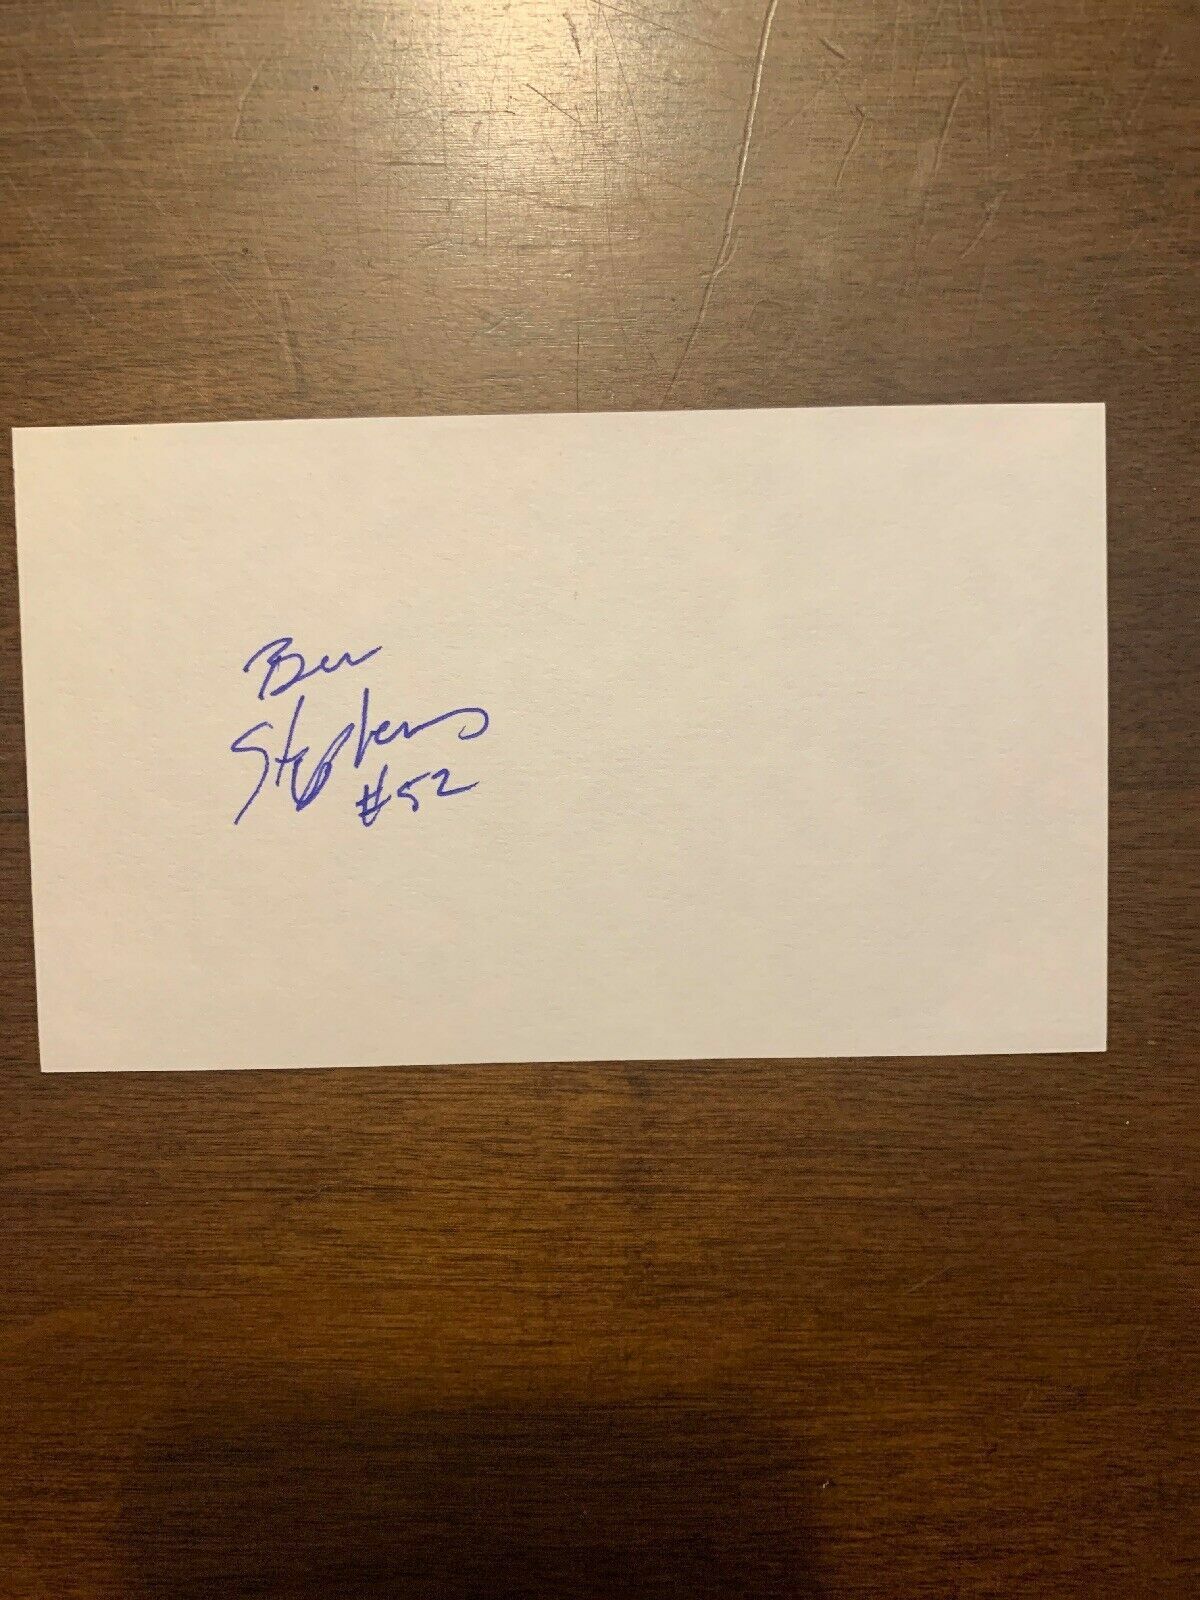 BEN STEPHENS - RICE FOOTBALL - AUTHENTIC AUTOGRAPH SIGNED INDEX -B2250